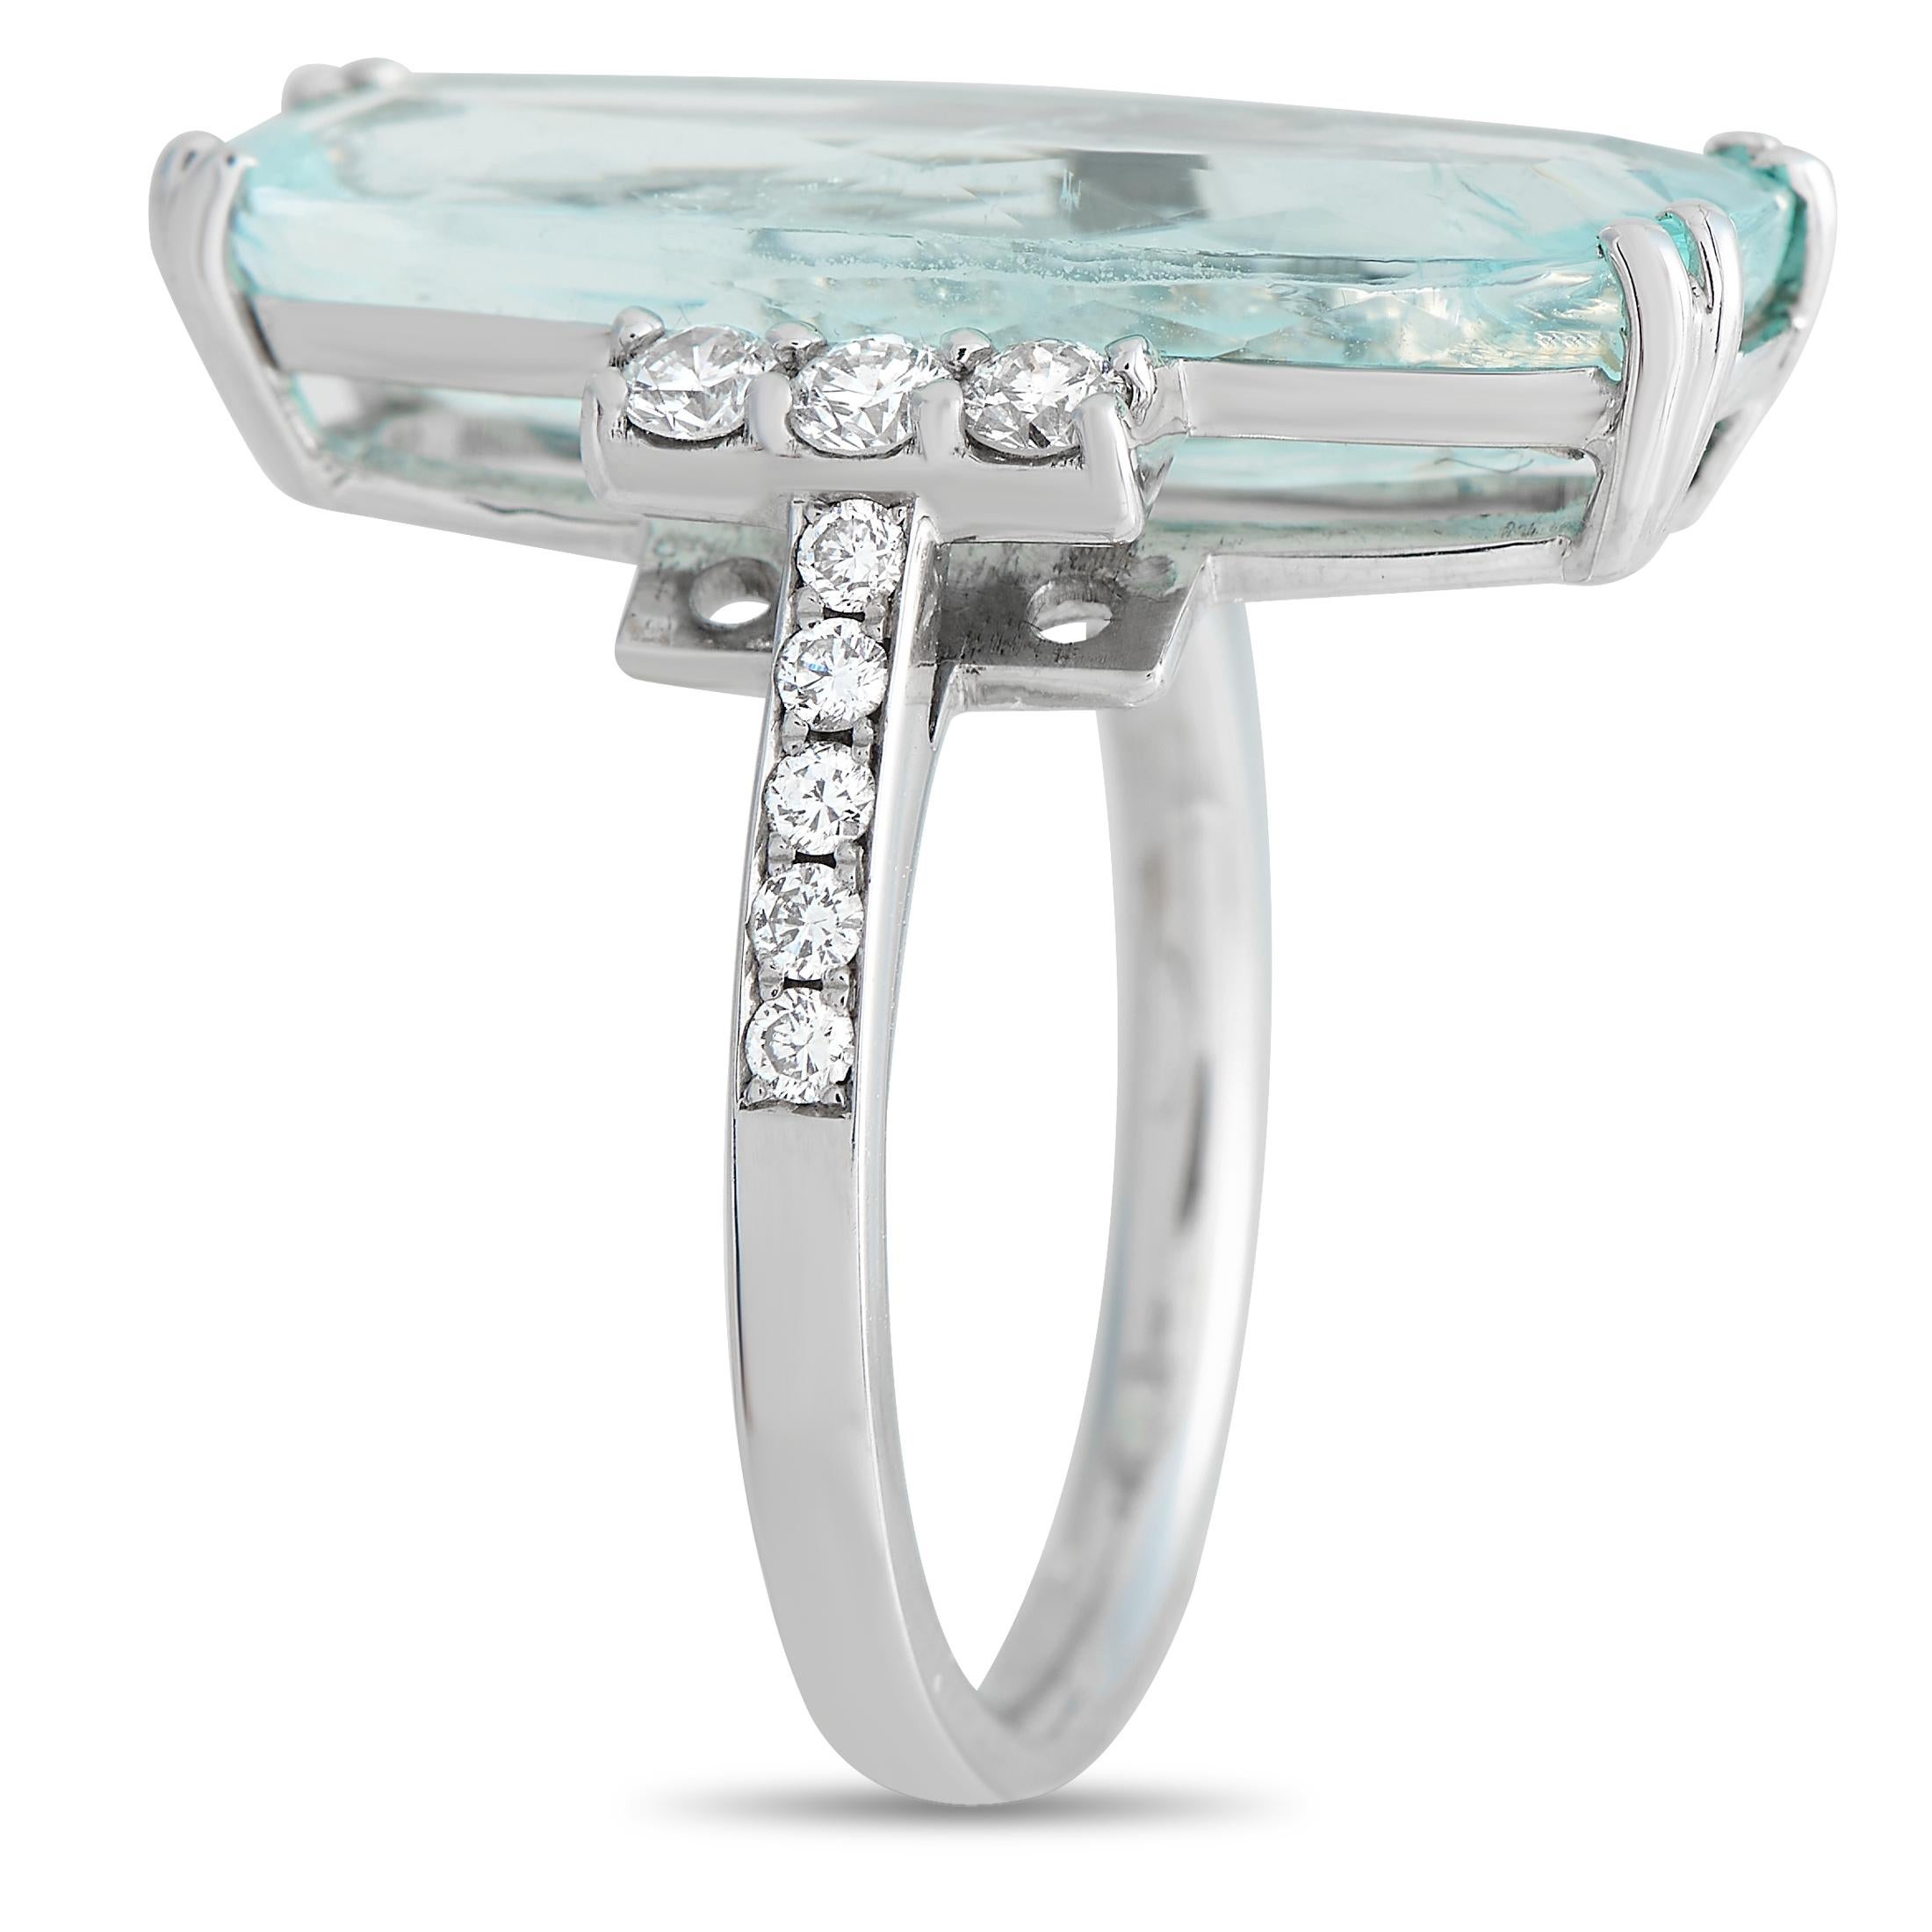 A breathtaking 10.64 carat blue paraiba tourmaline gemstone makes a statement at the center of this exquisite ring. Crafted from 18K White Gold, diamond accents with a total weight of 0.35 carats add a touch of extra elegance. This piece features a